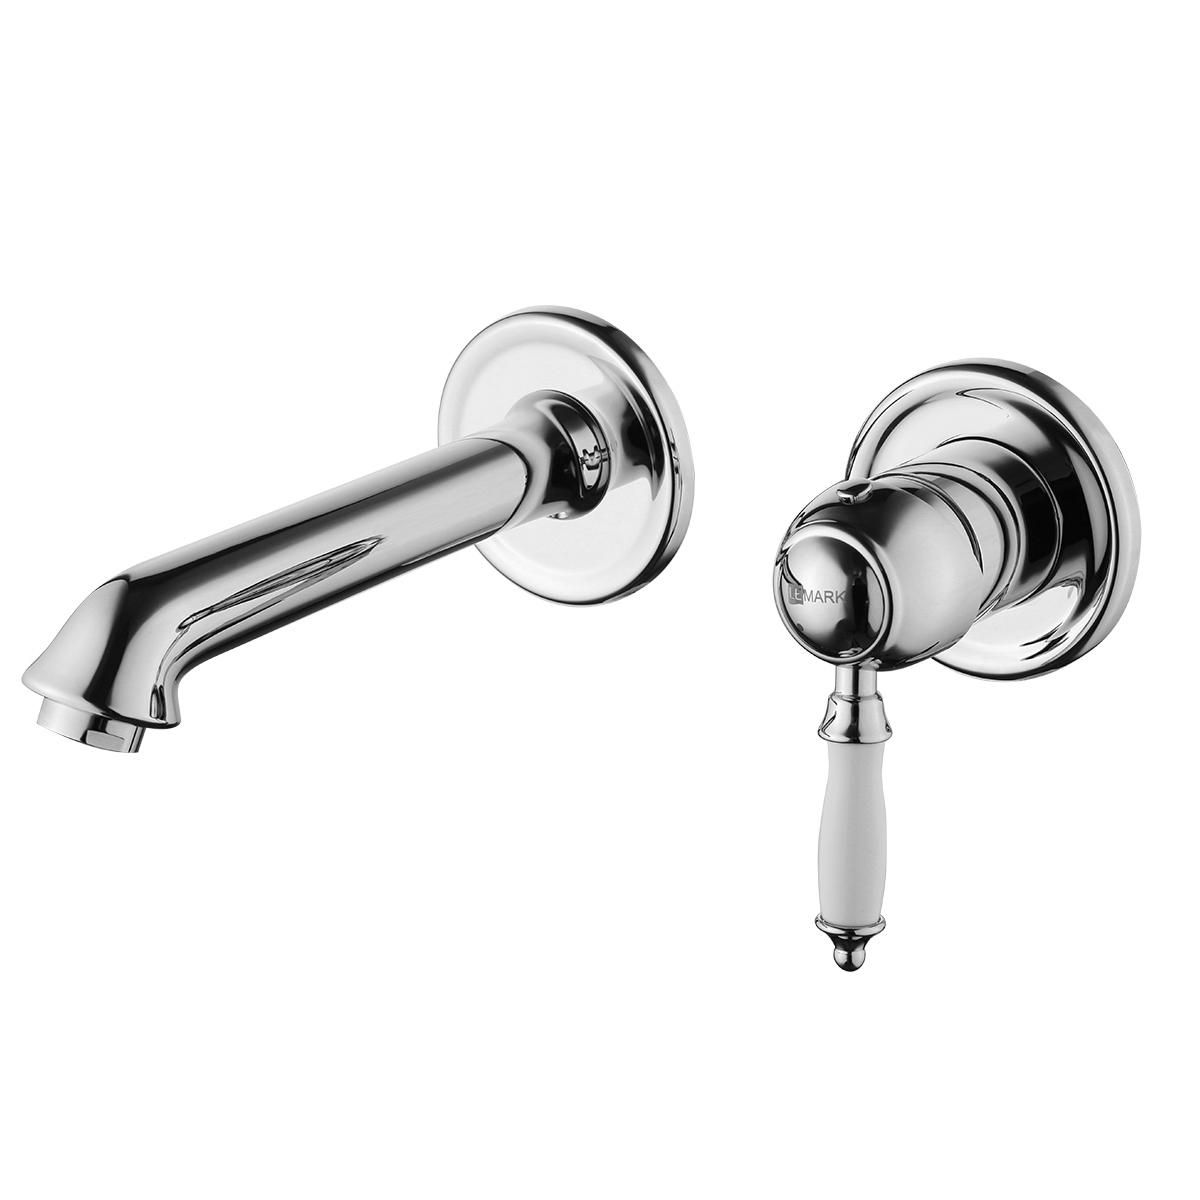 LM4826C Built-in washbasin faucet